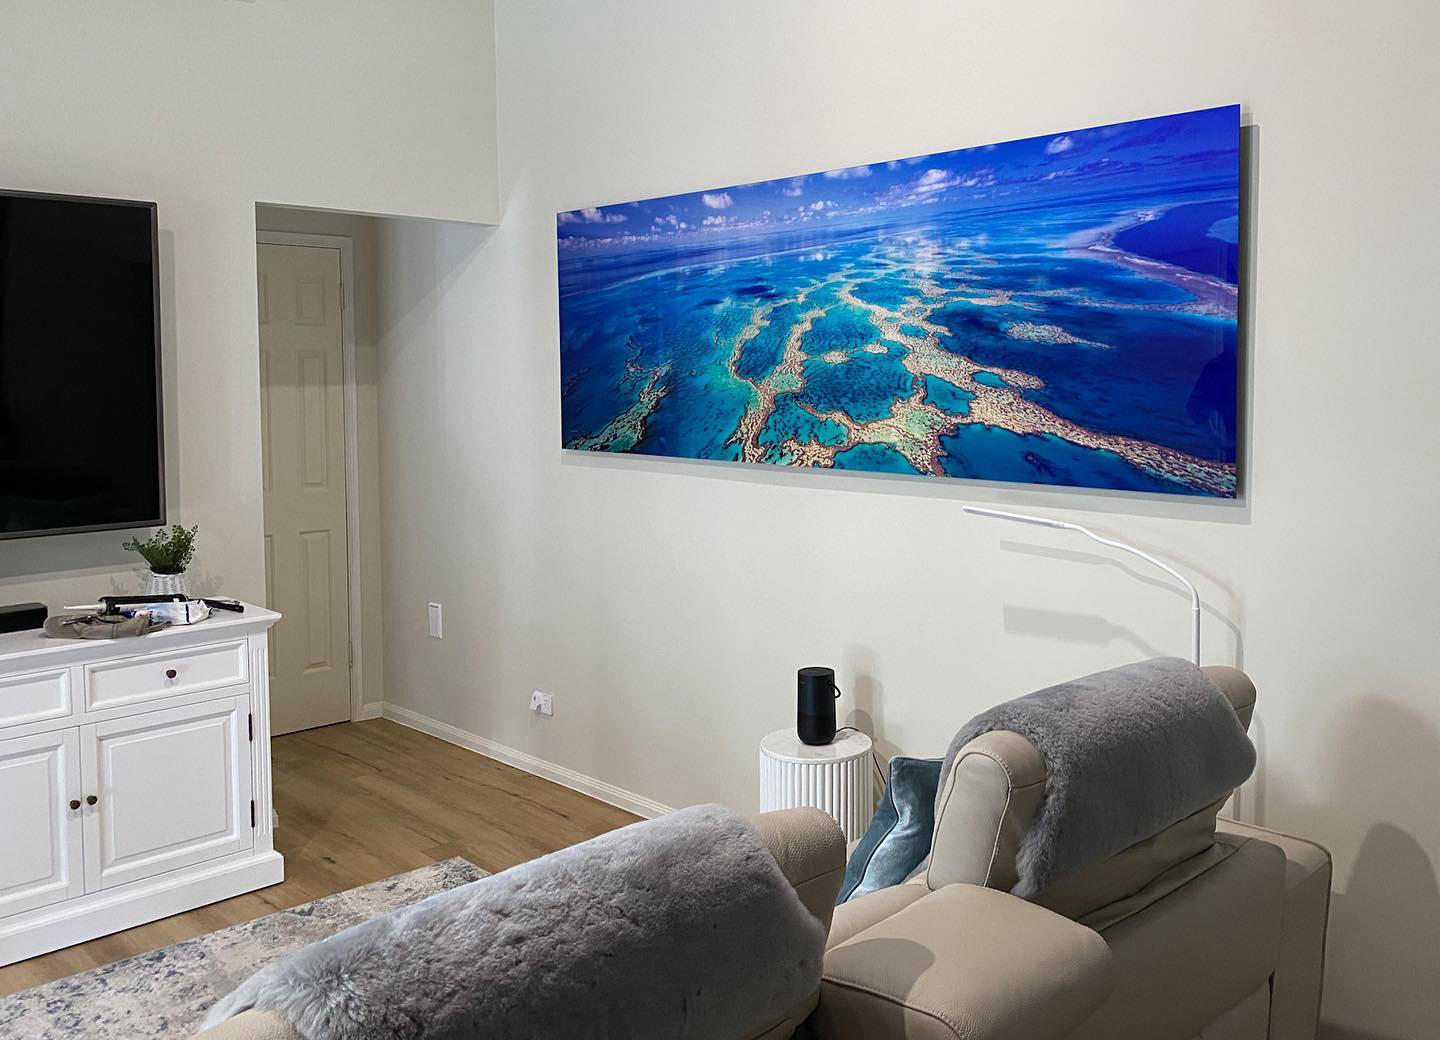 Some of you may have seen this large 100inch frameless acrylic ‘Reef Dreaming’ that has featured as